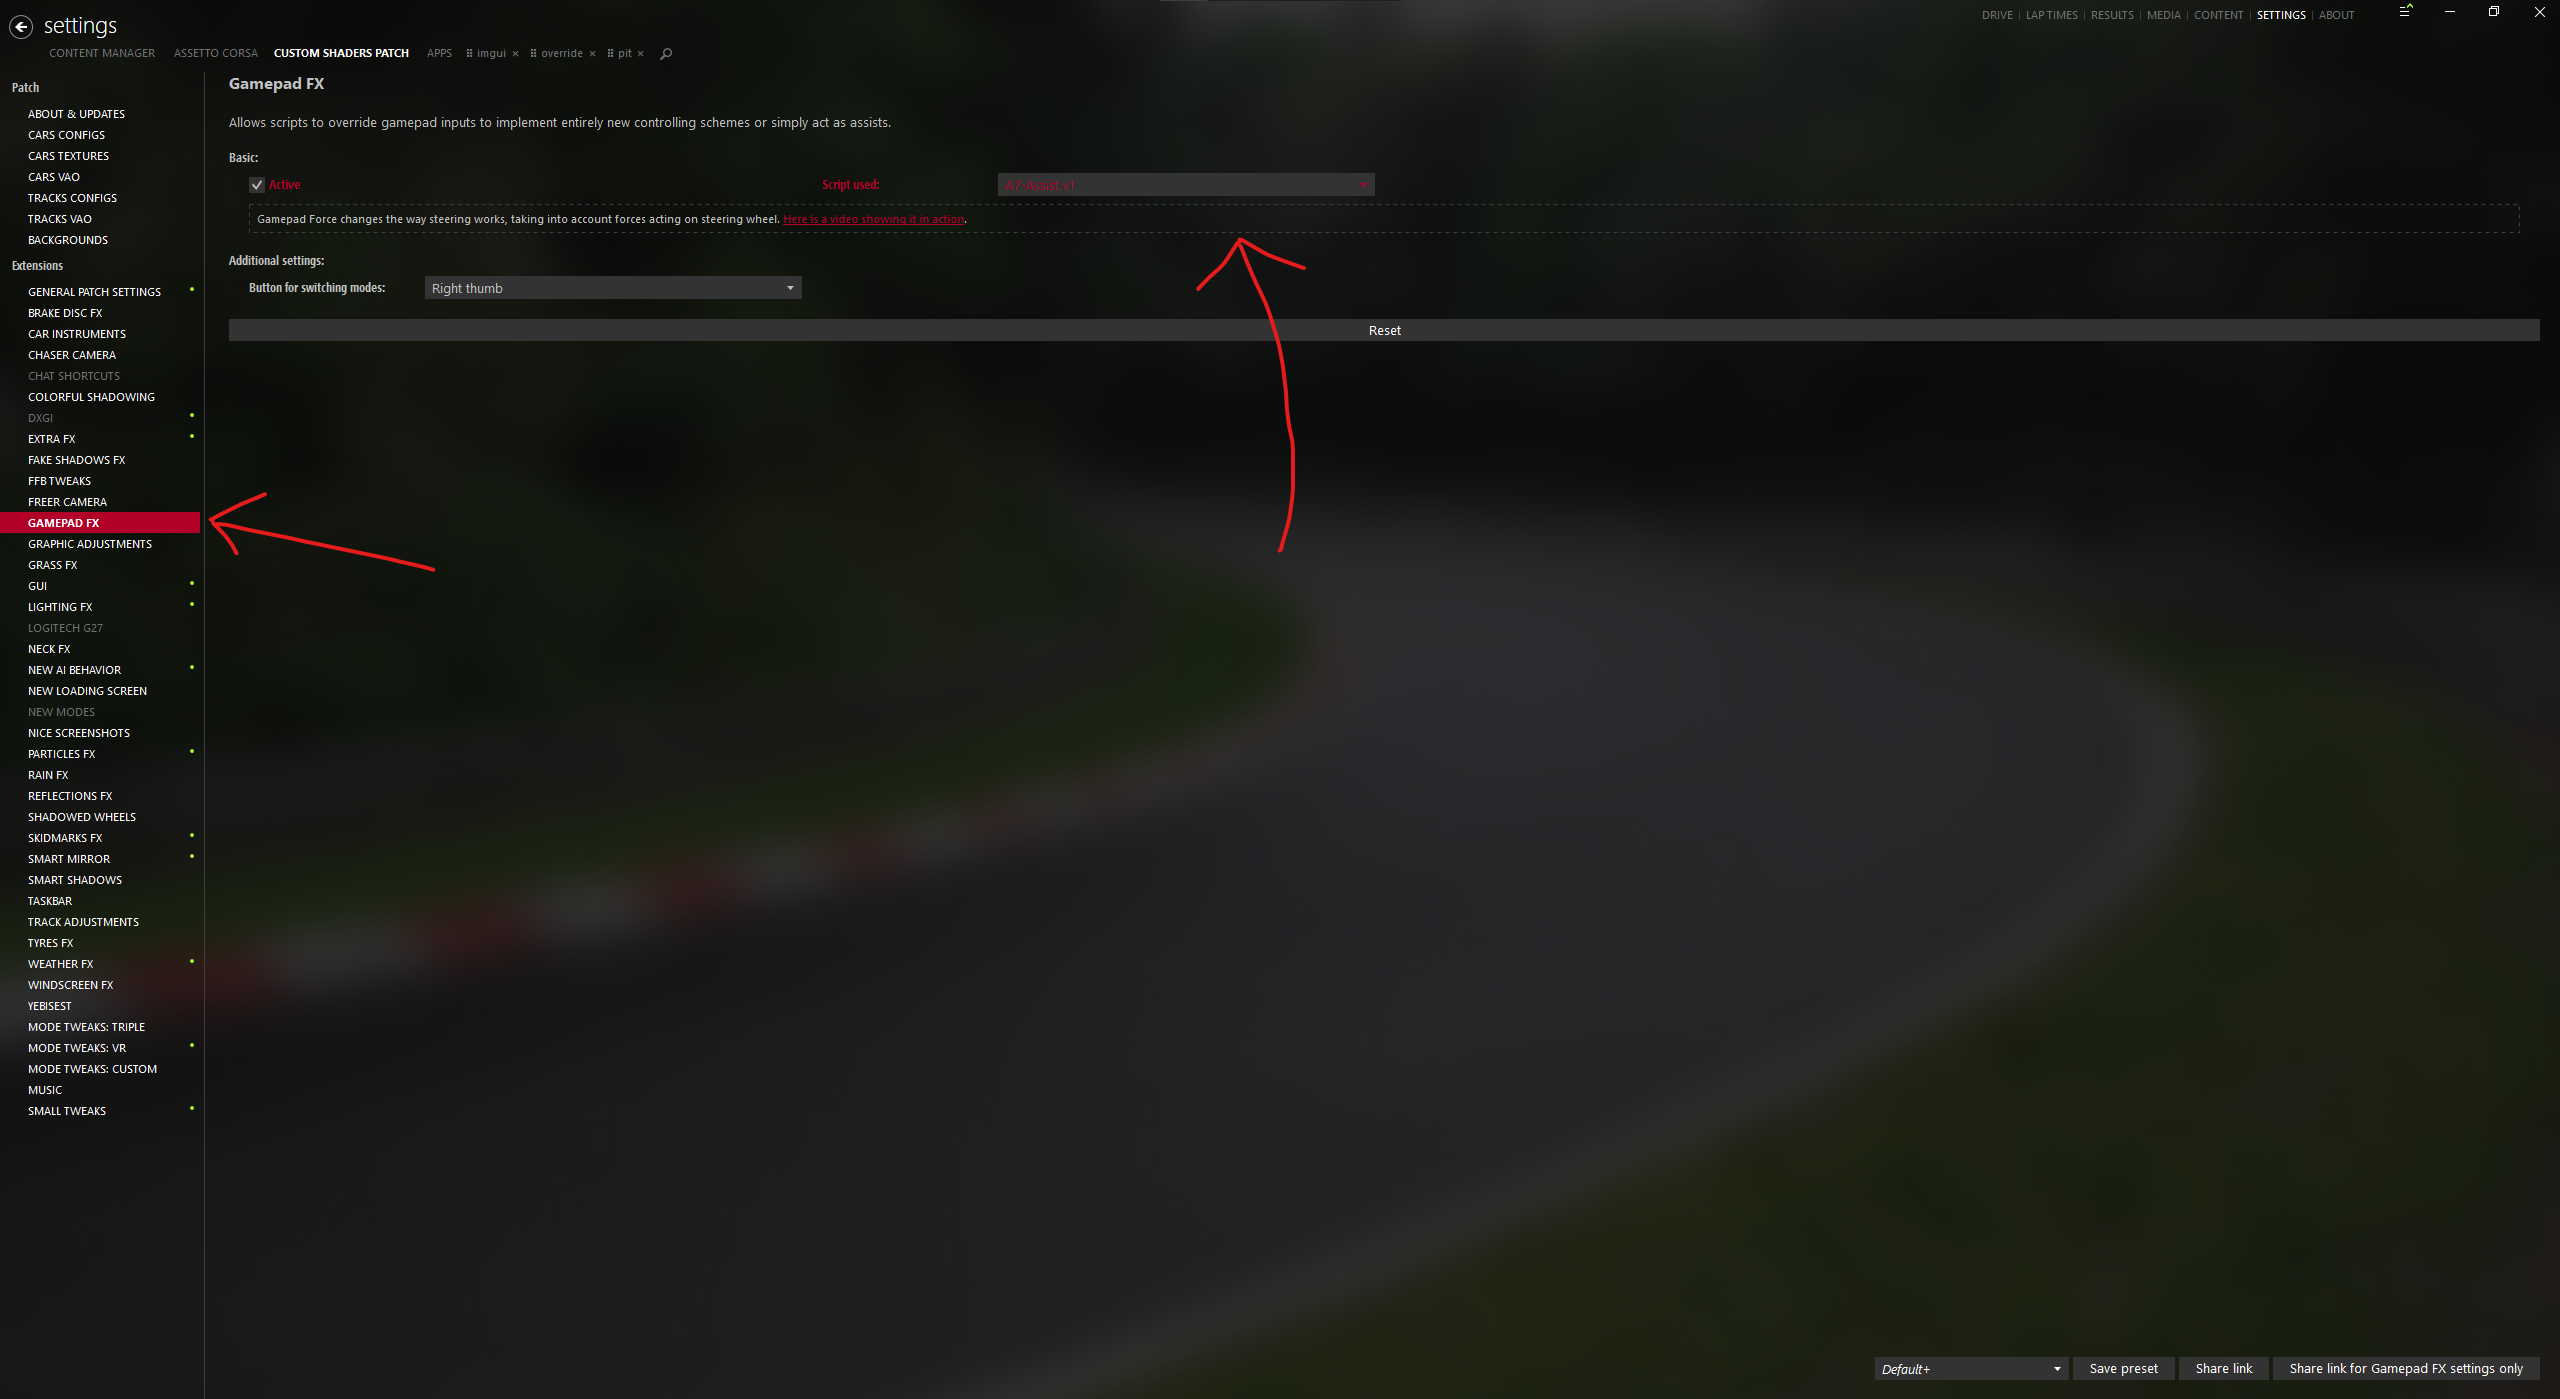 Assetto Corsa Content Manager 